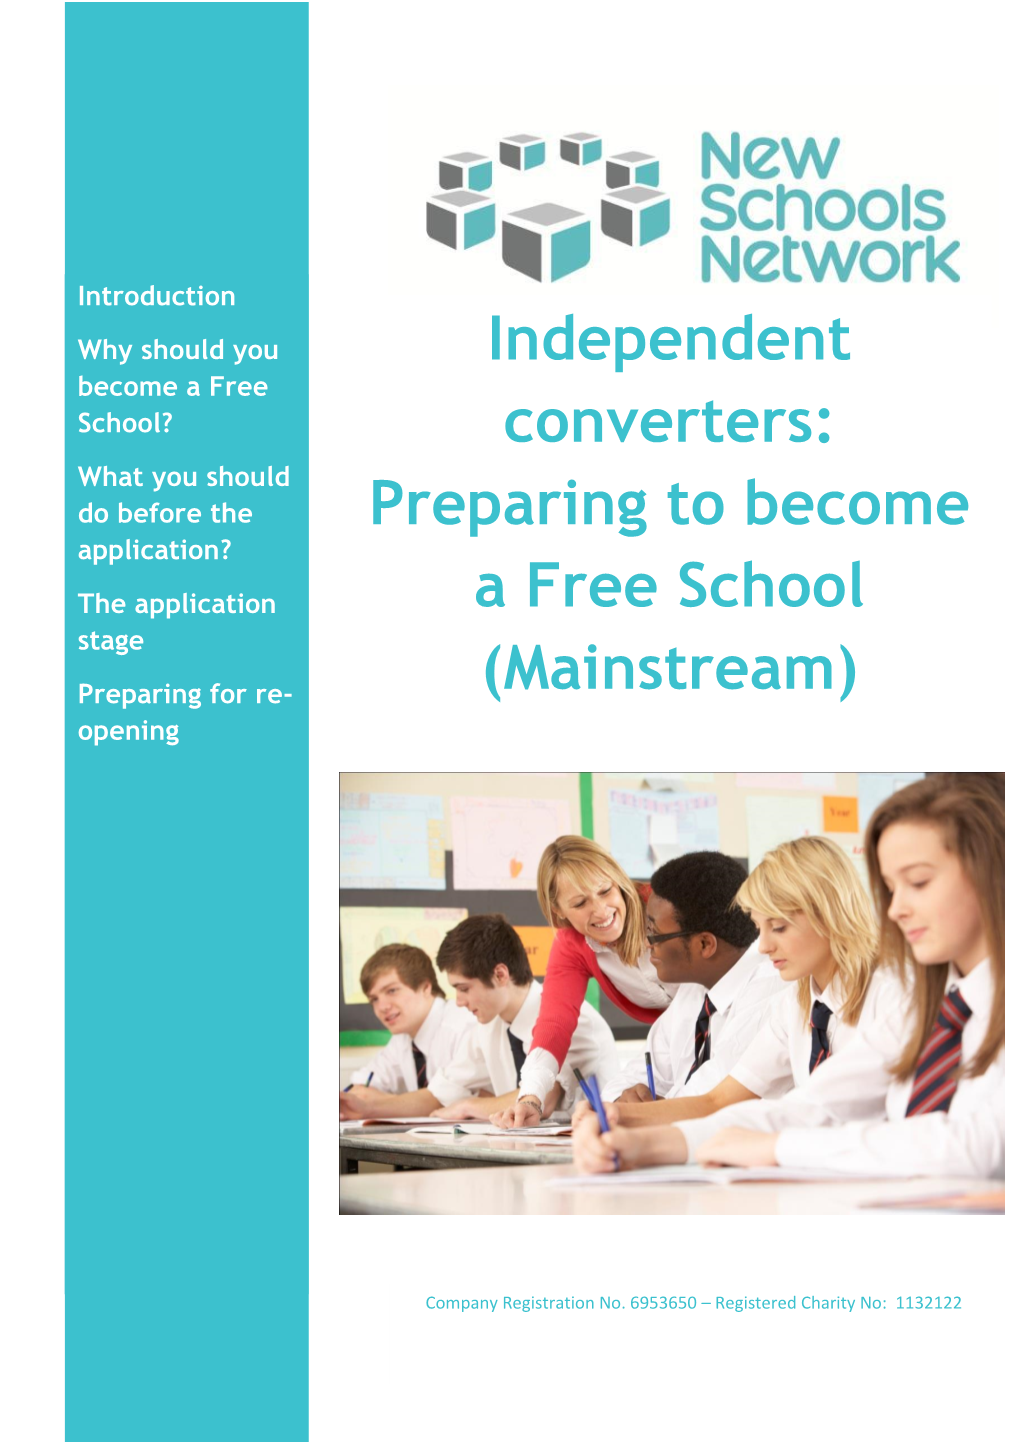 Independent Converters: Preparing to Become a Free School (Mainstream)